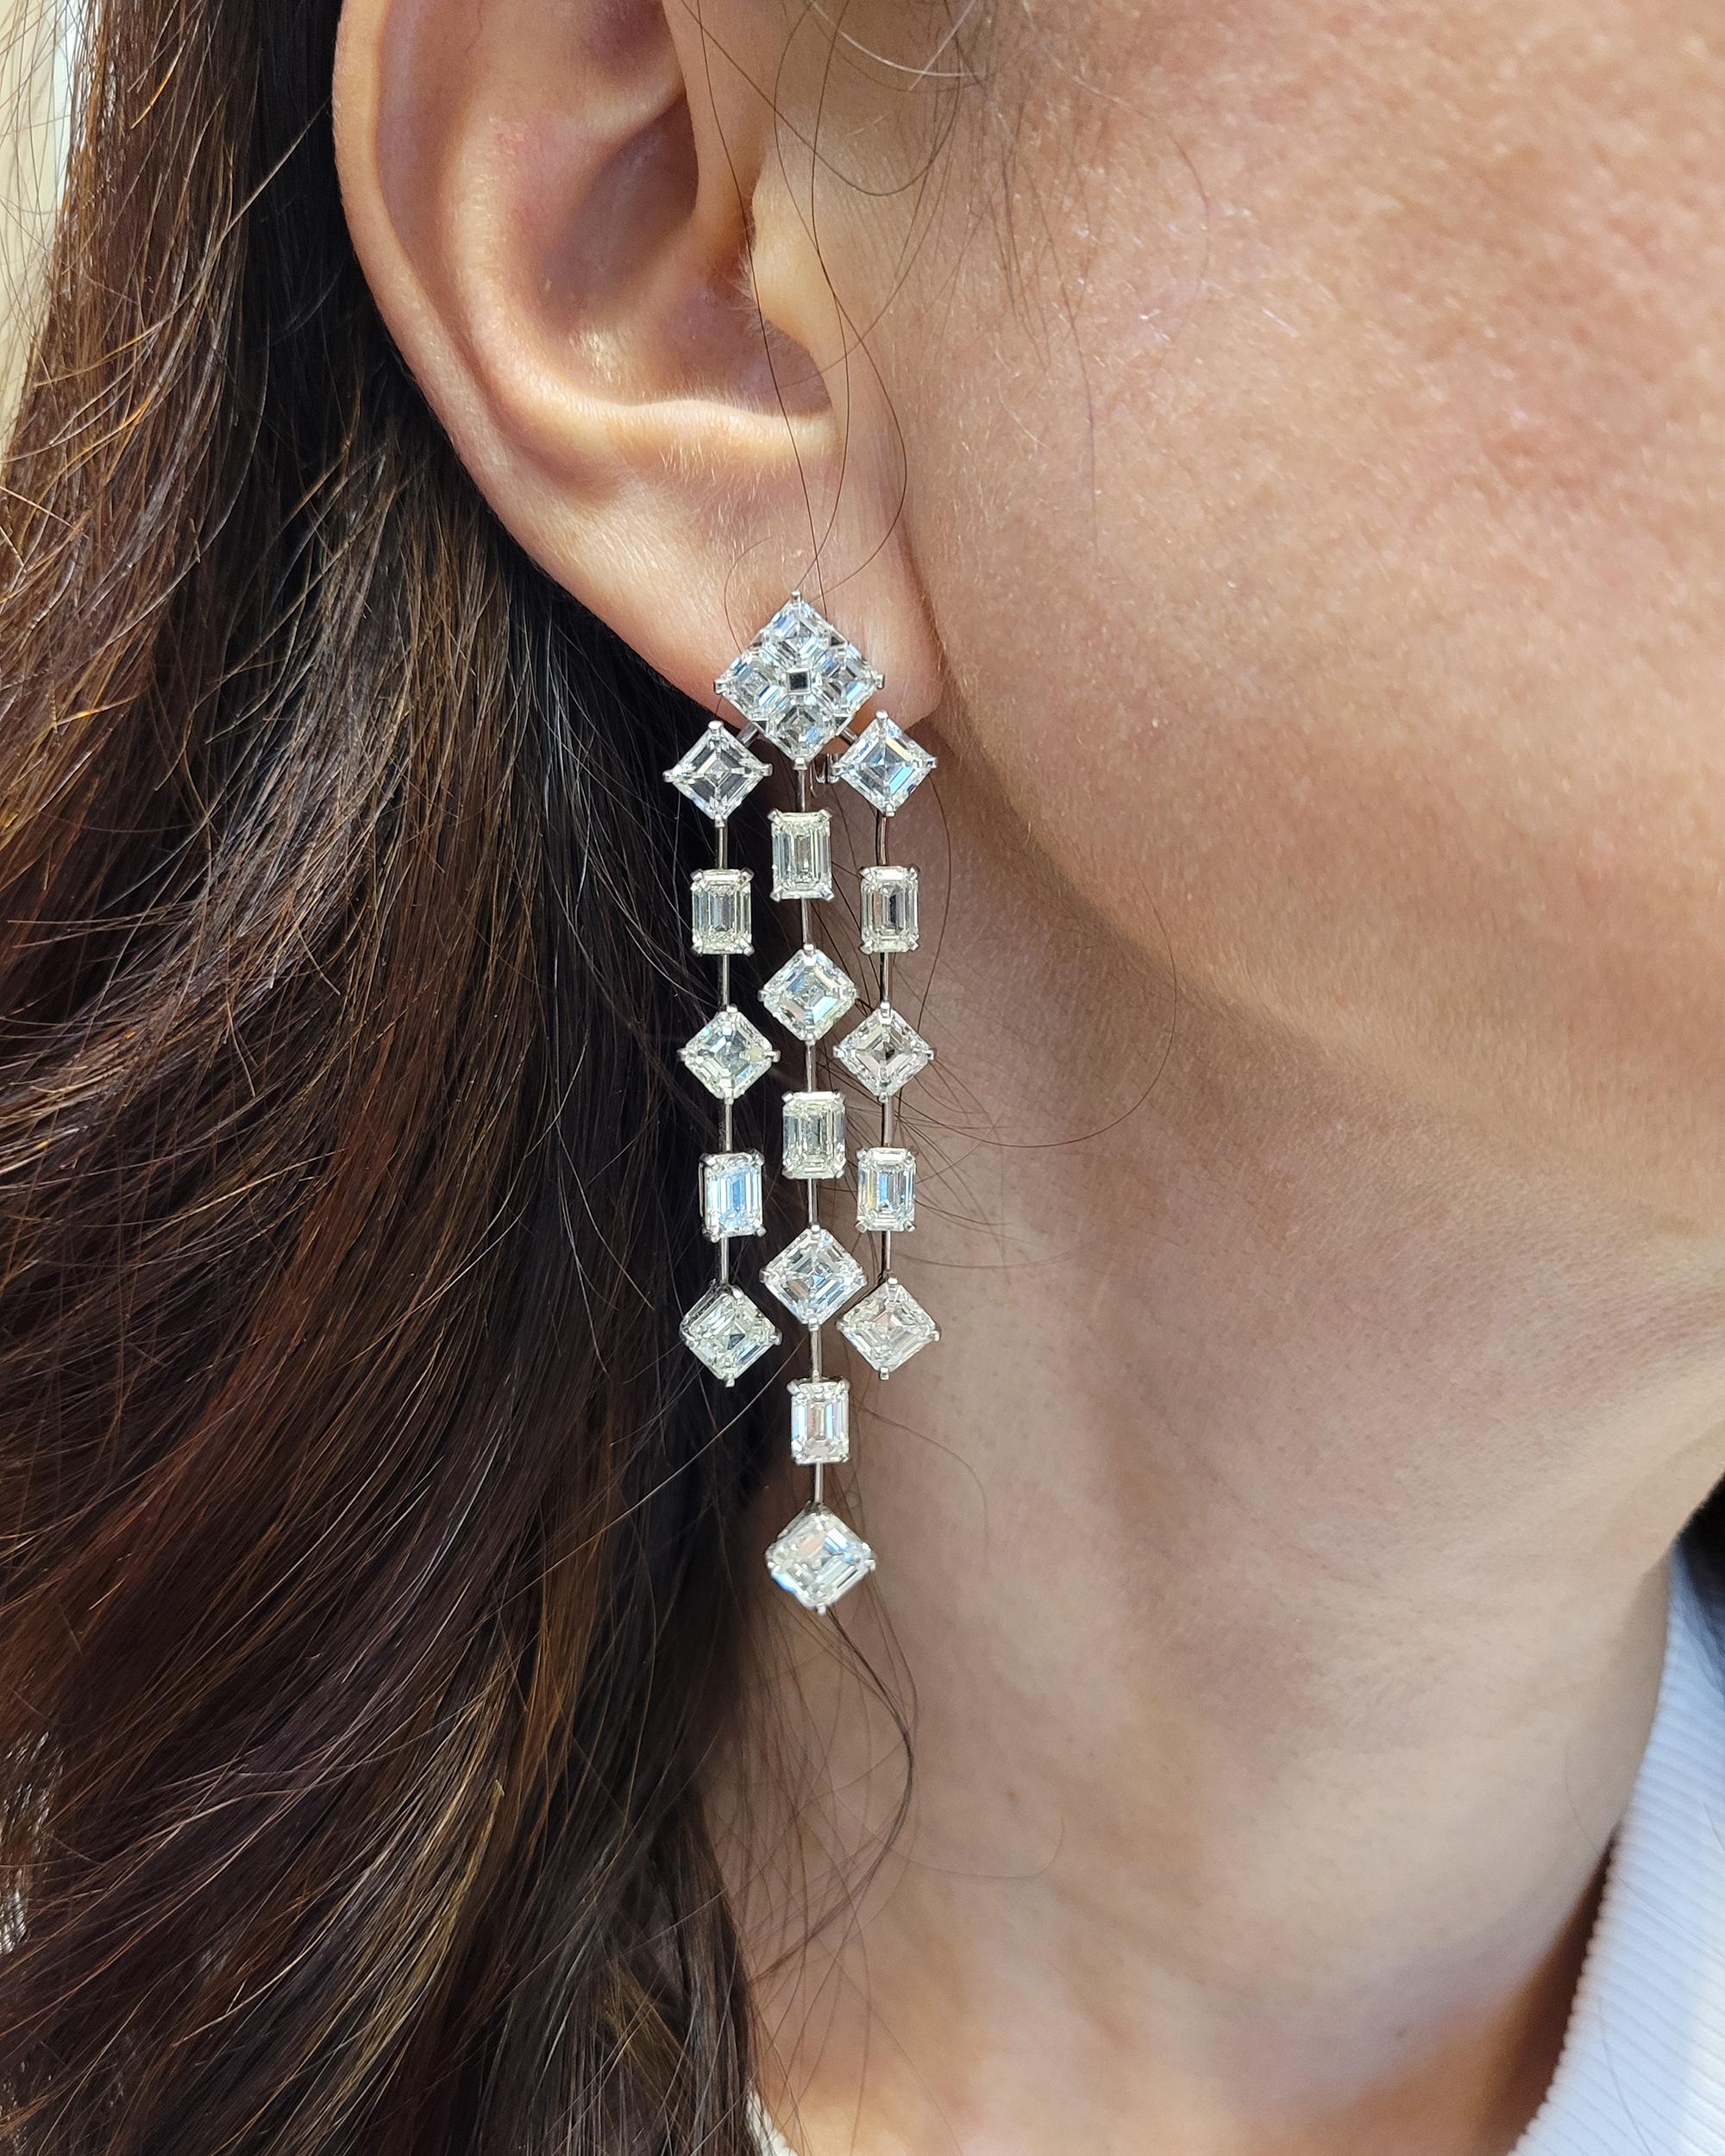 Indulge in the ultimate expression of luxury with these exquisite chandelier earrings. Crafted from the finest platinum and adorned with a stunning mix of diamond shapes, these earrings are sure to turn heads.

There are eighteen emerald-cut